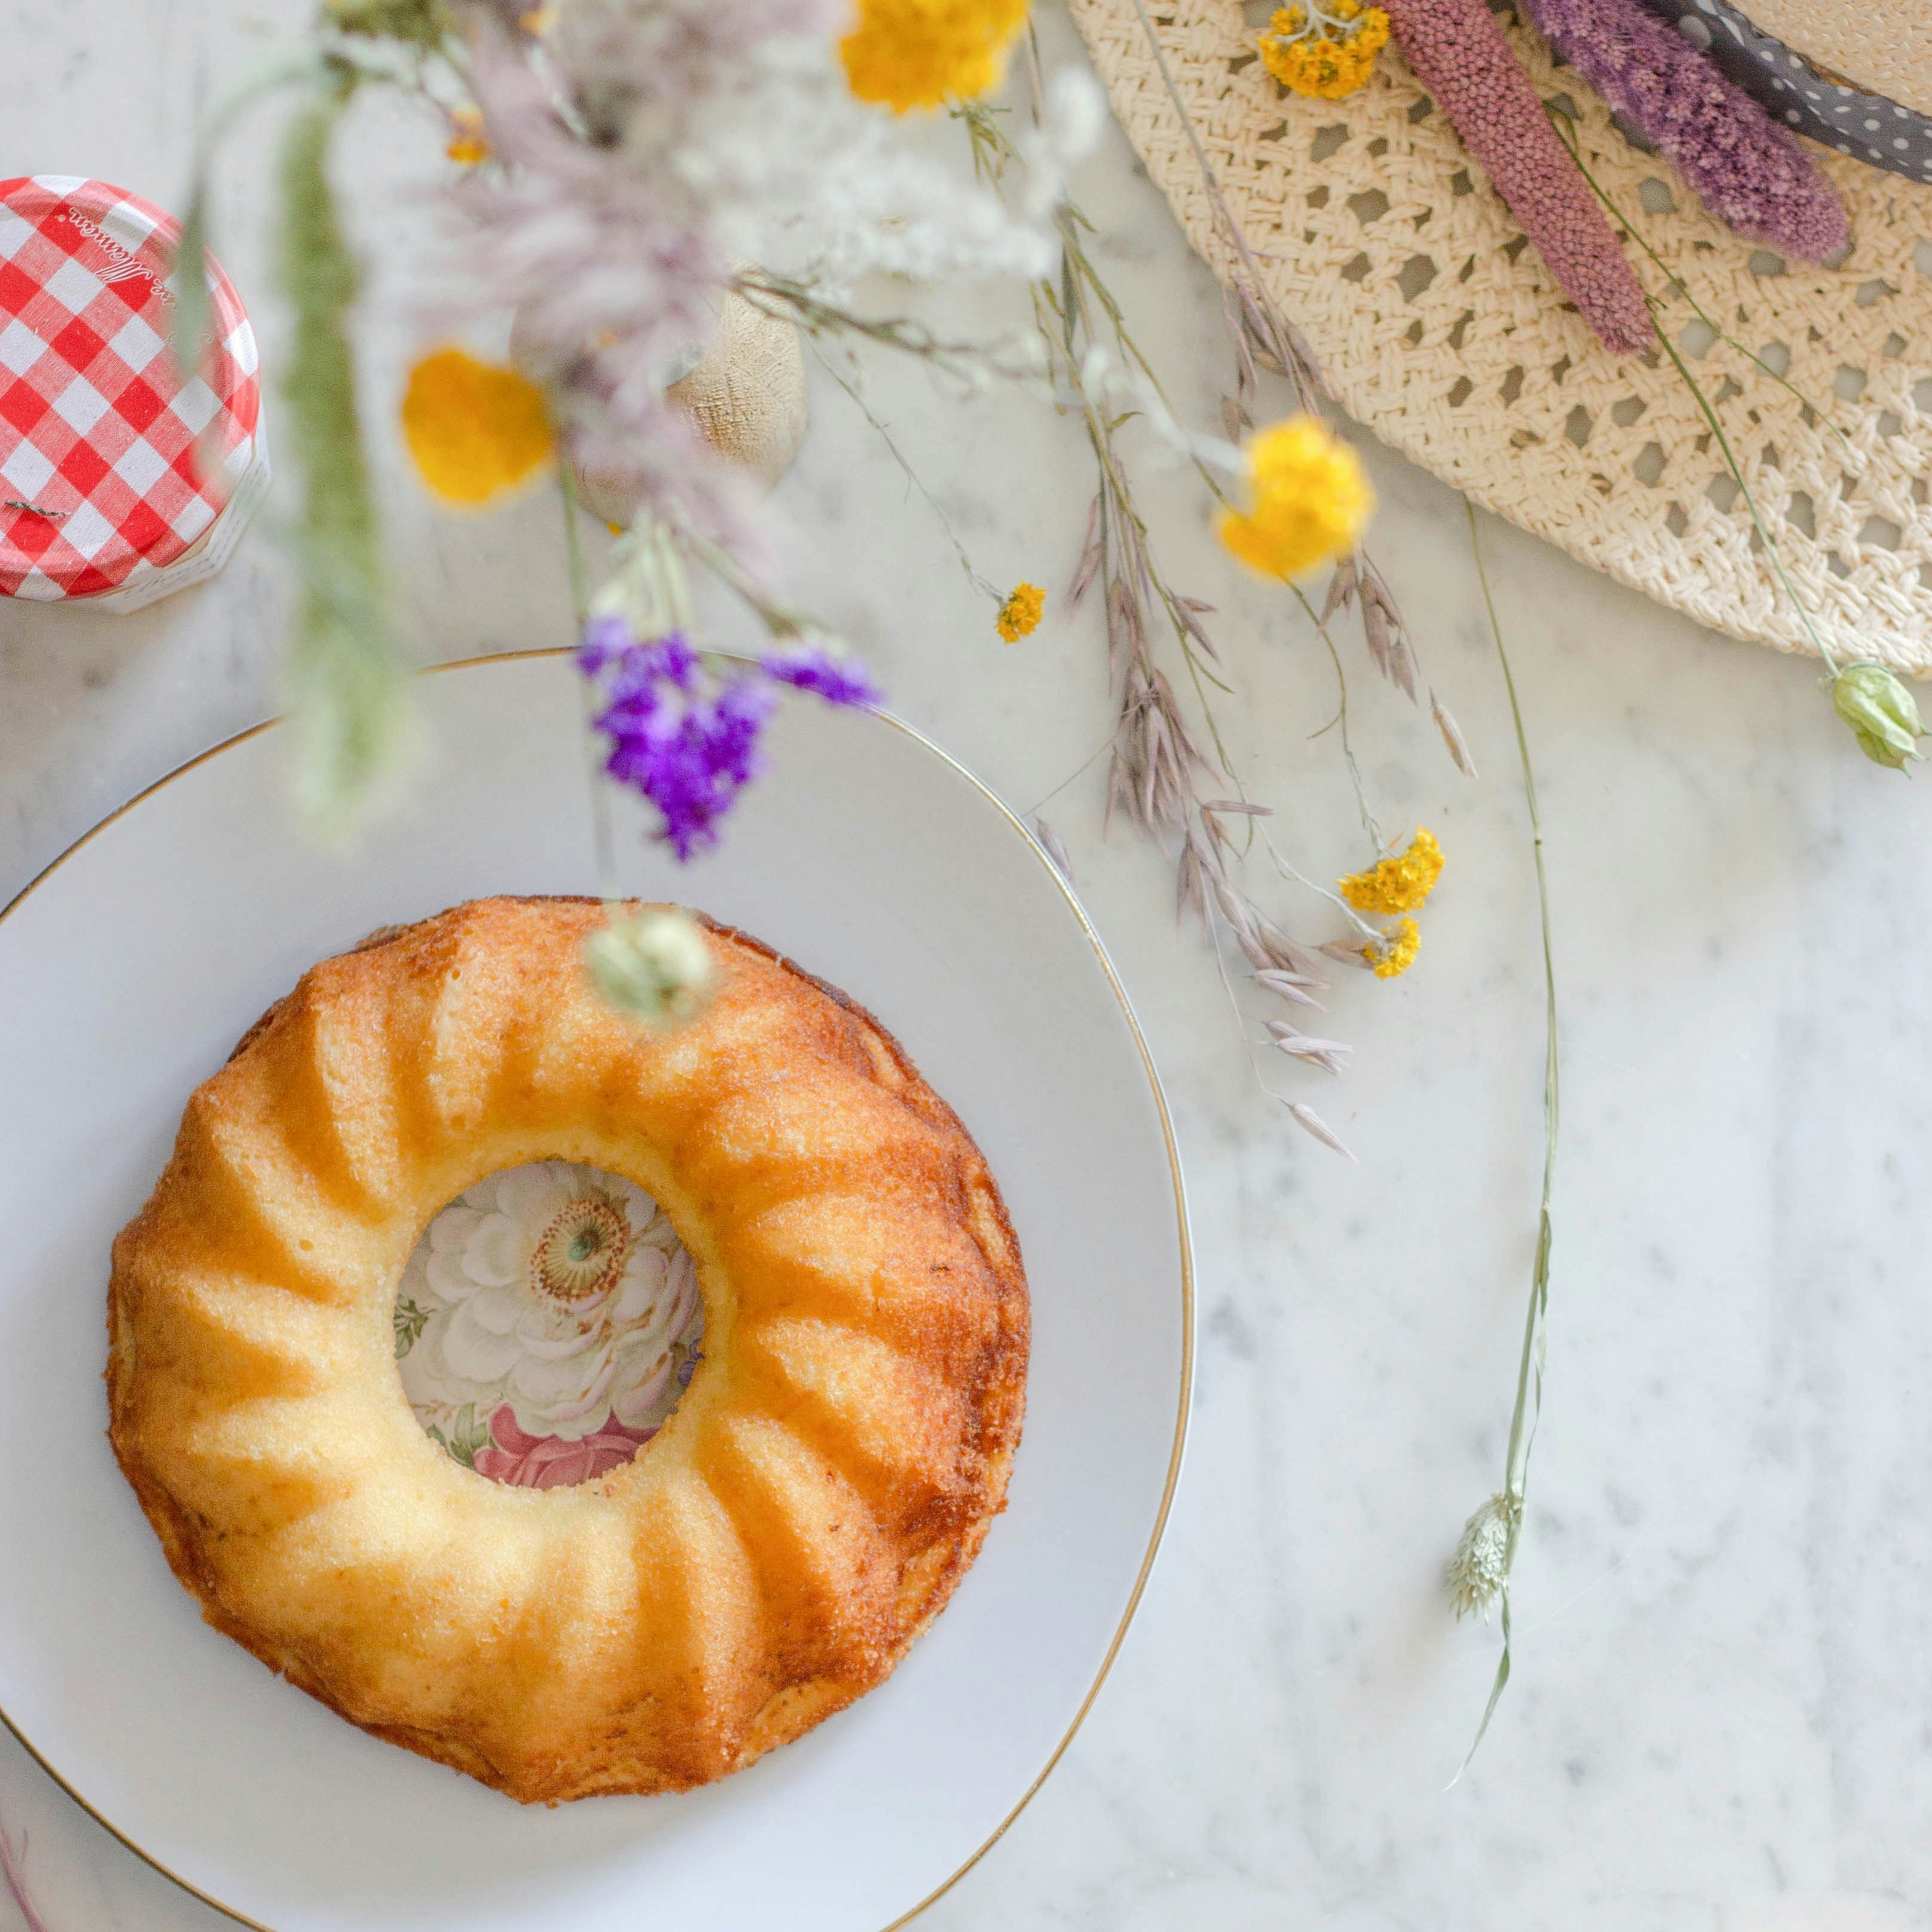 Bundt cake on plate with flowers